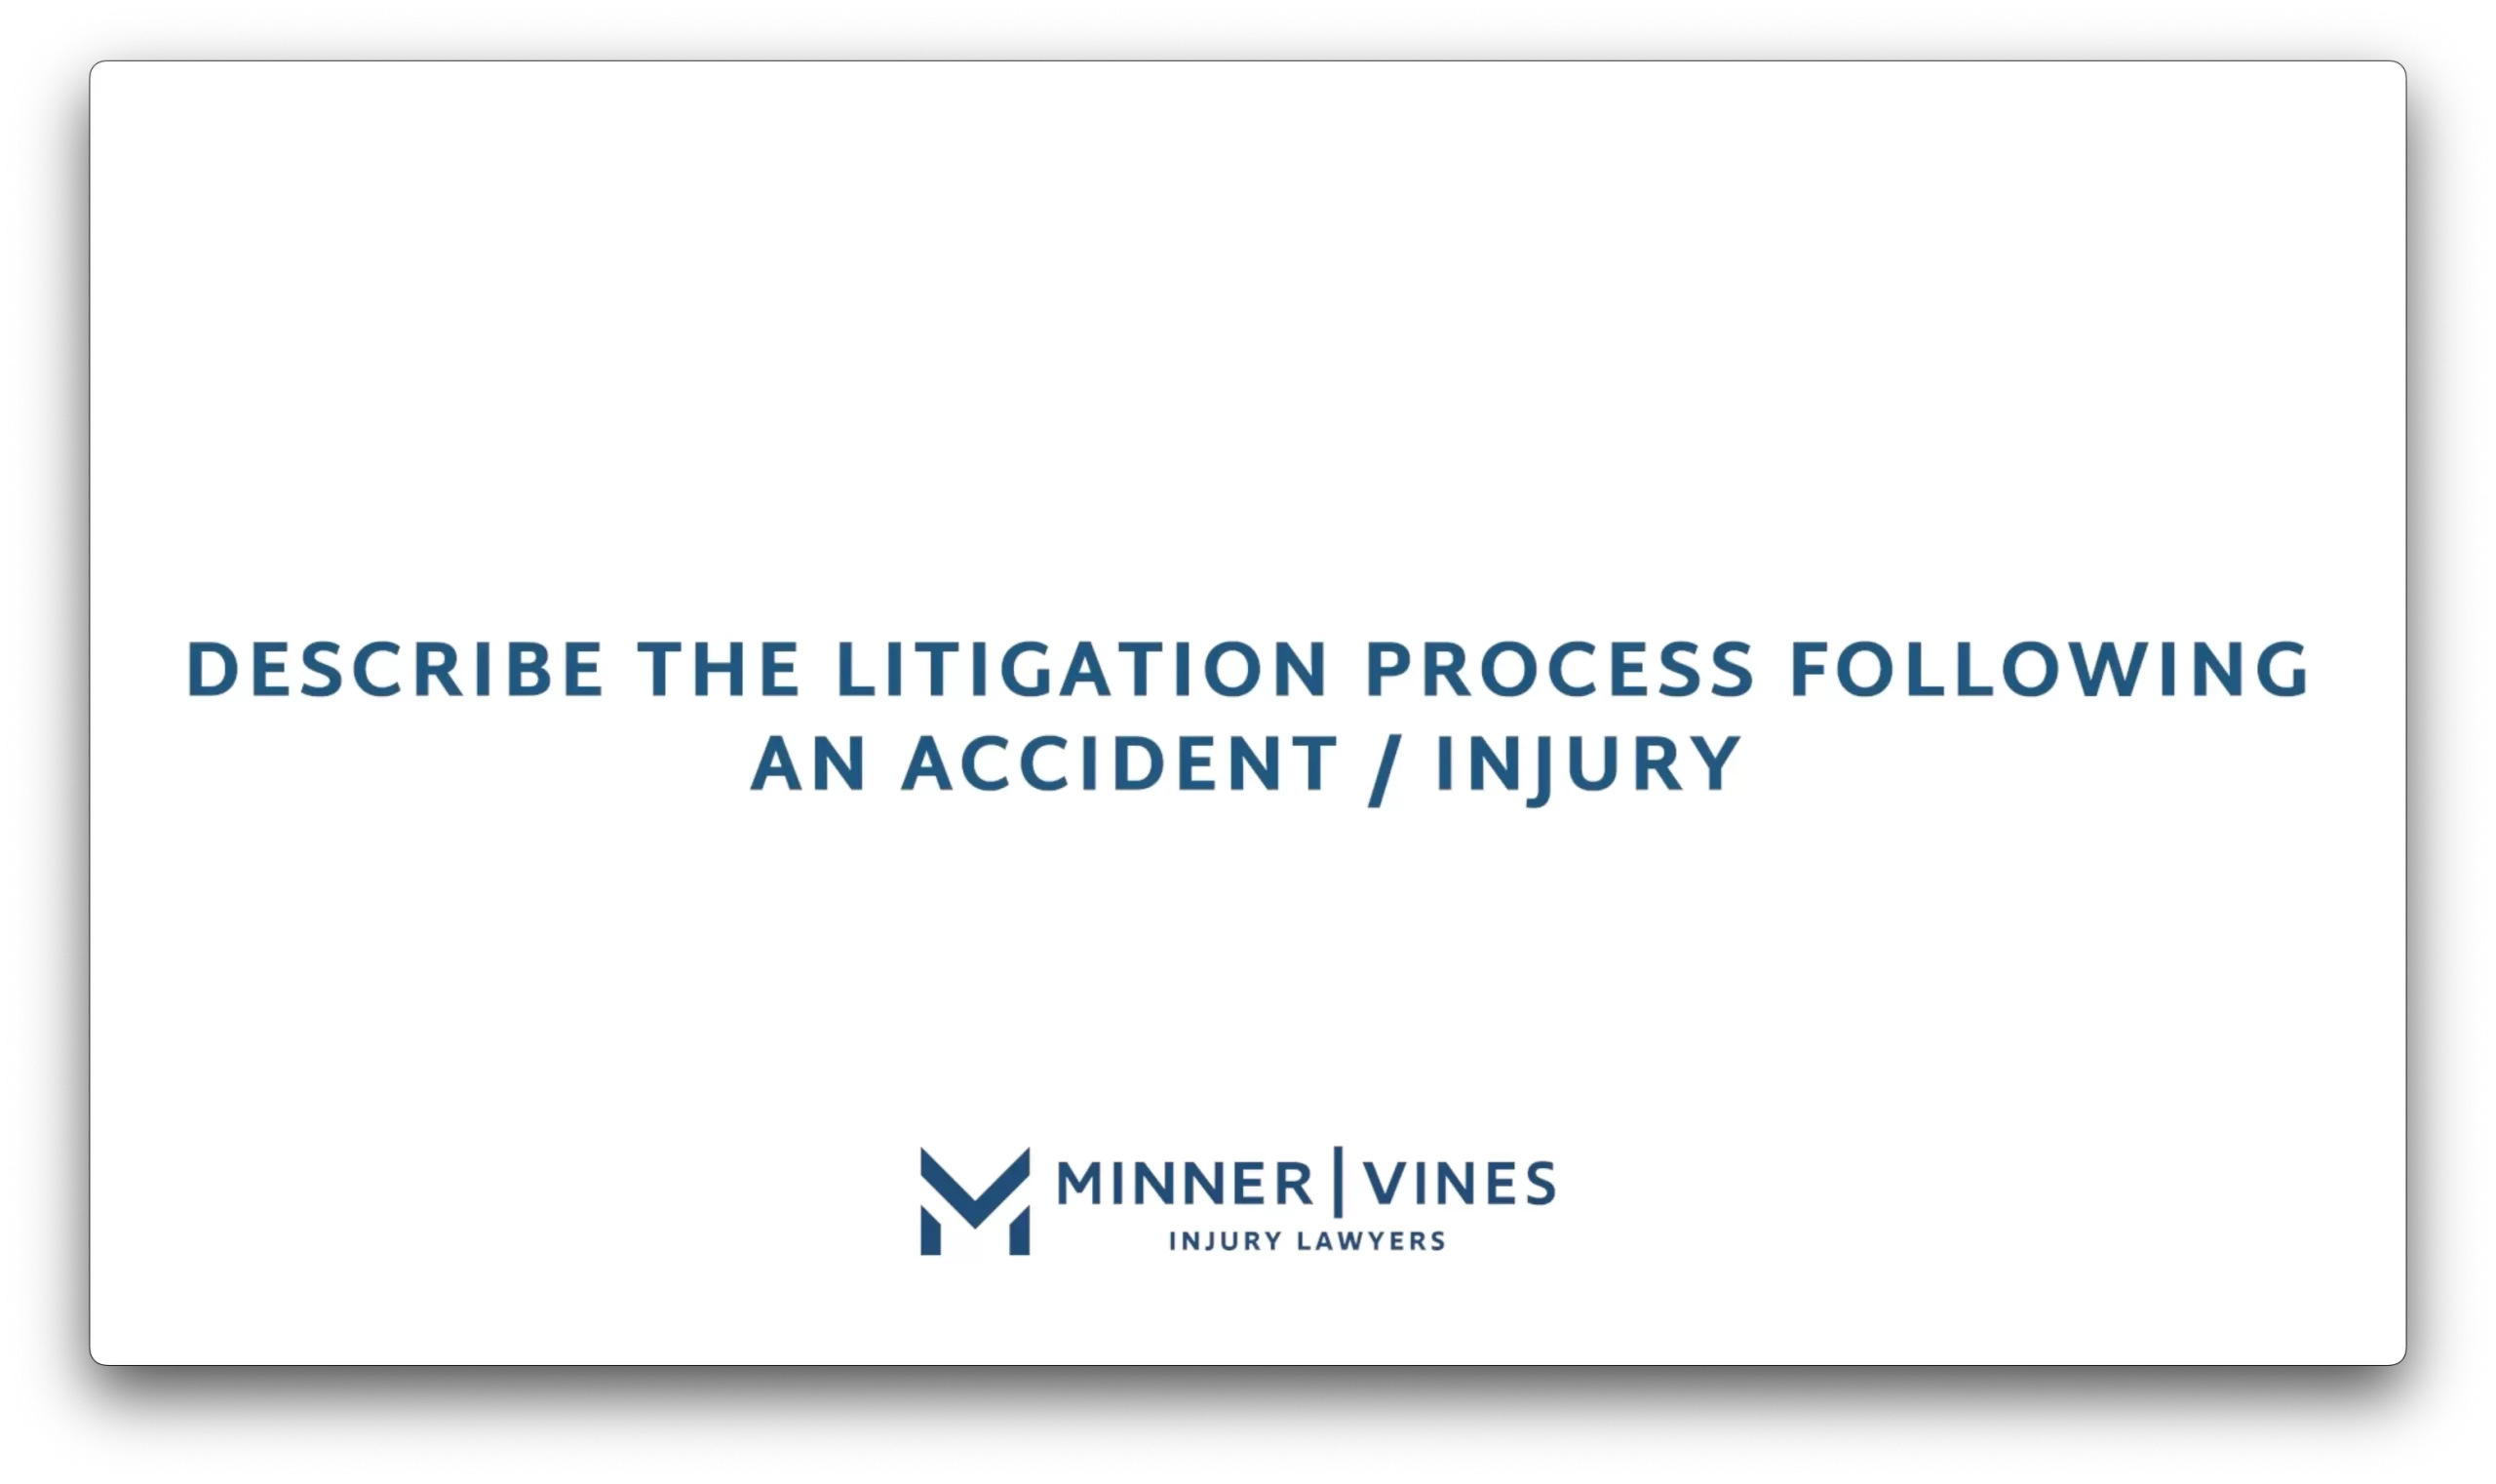 Describe the litigation process following an accident or injury